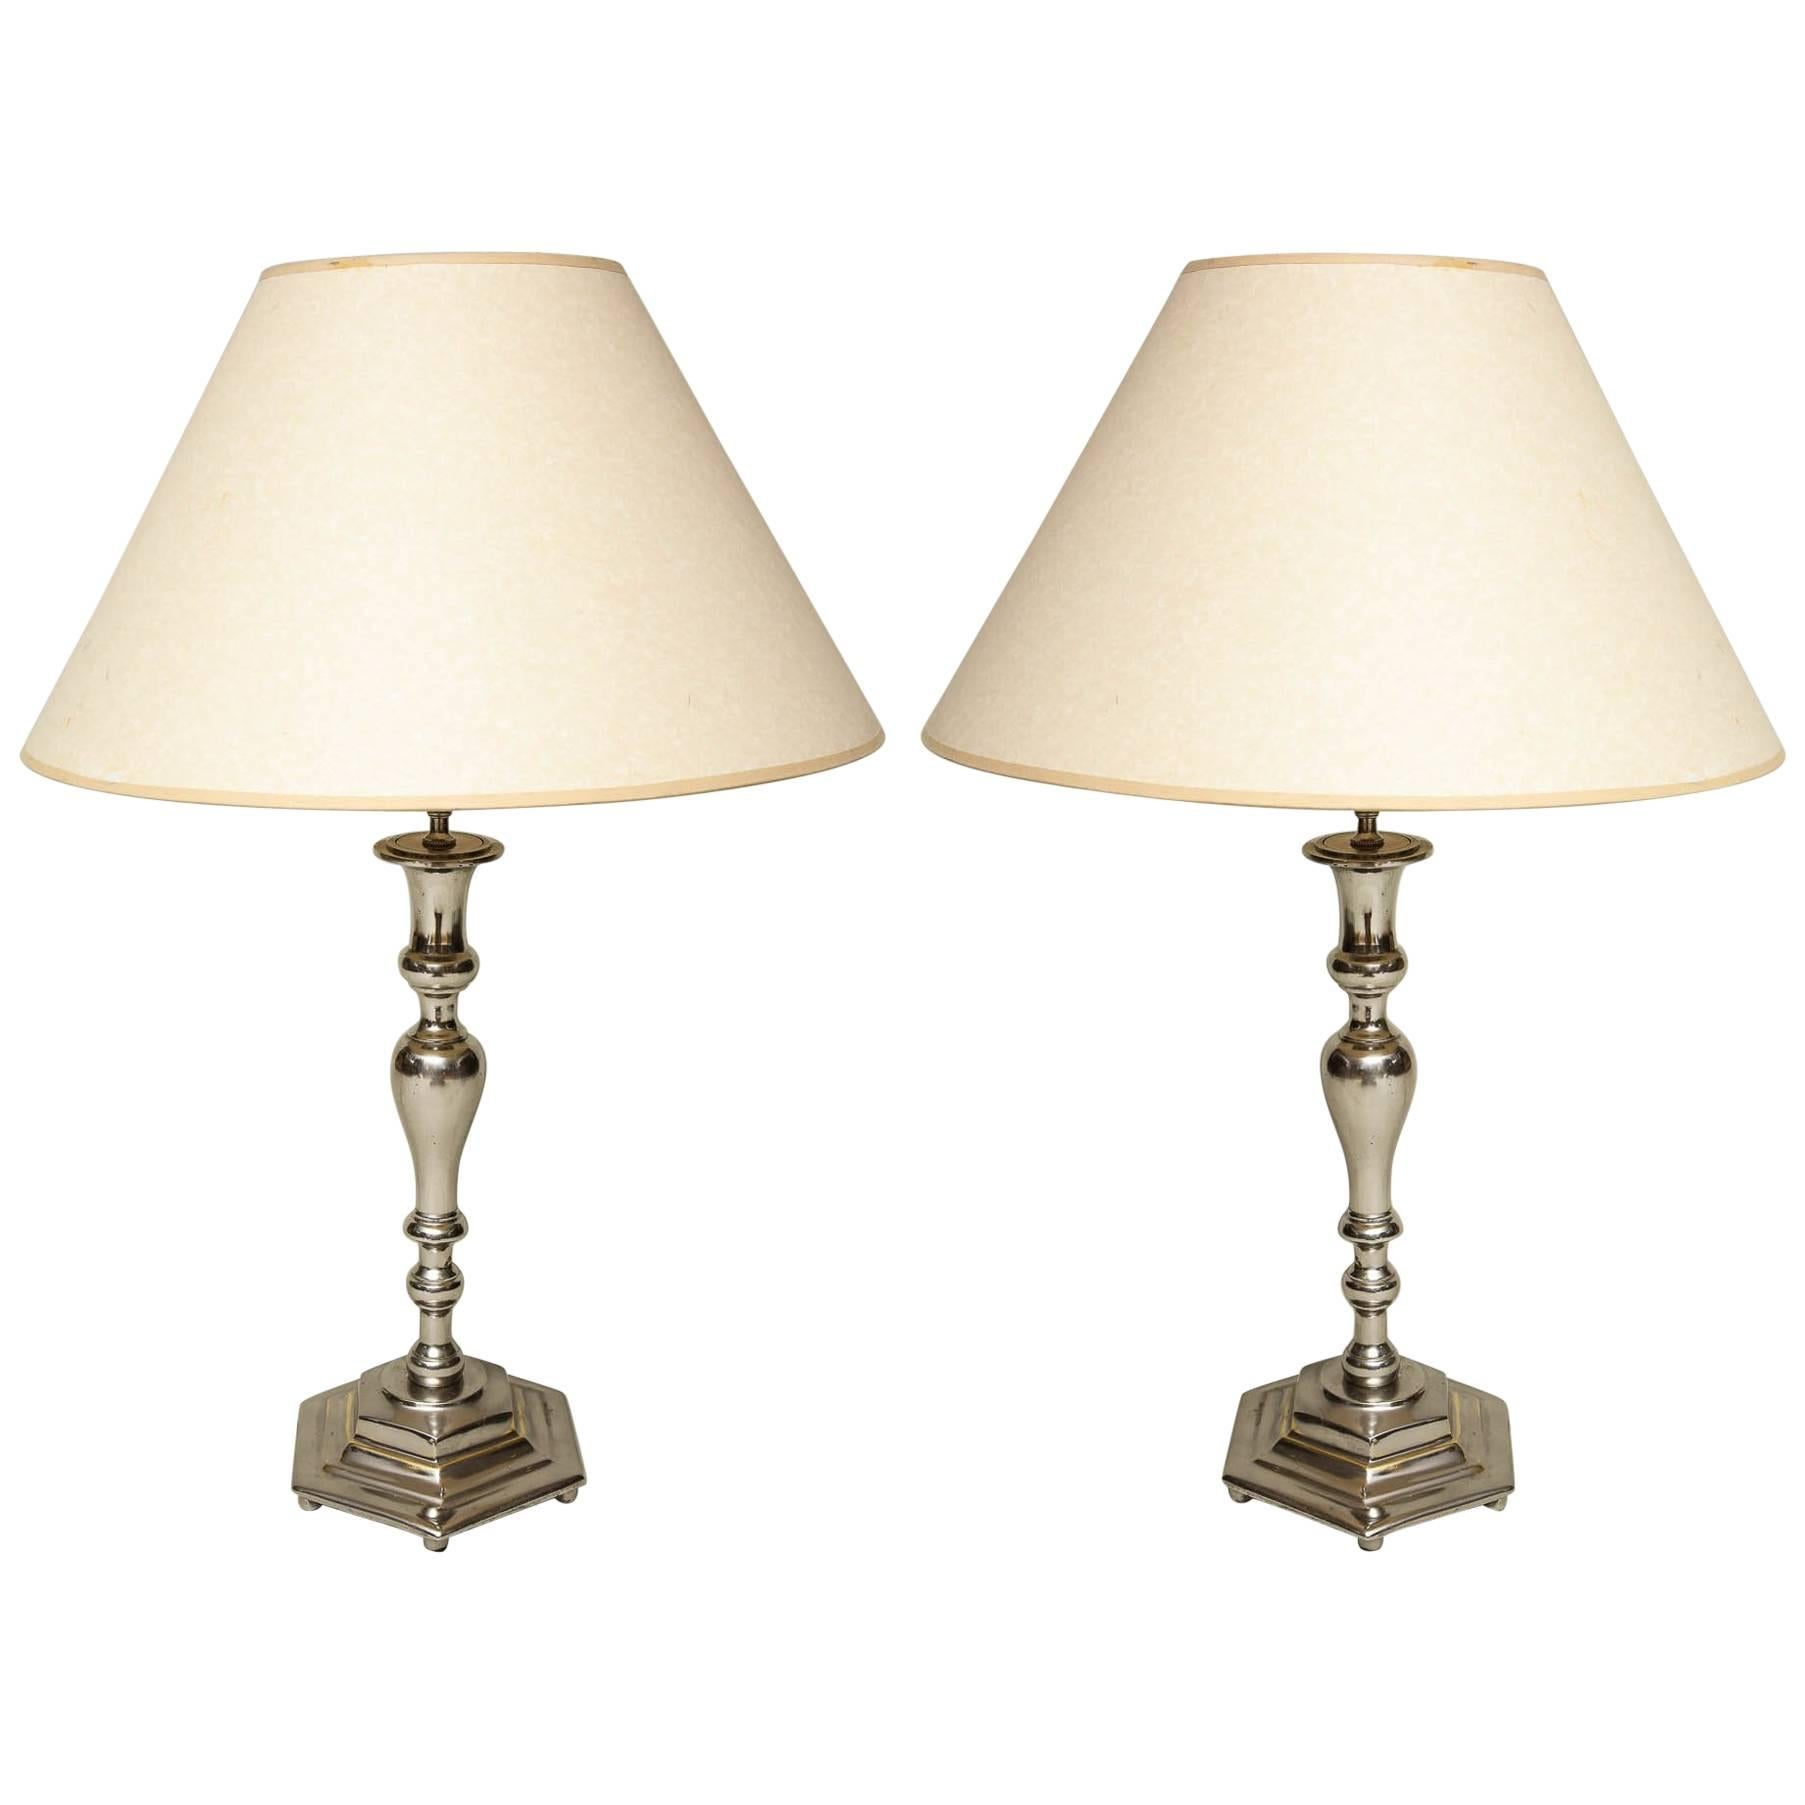 Silvered Tabletop Lamps